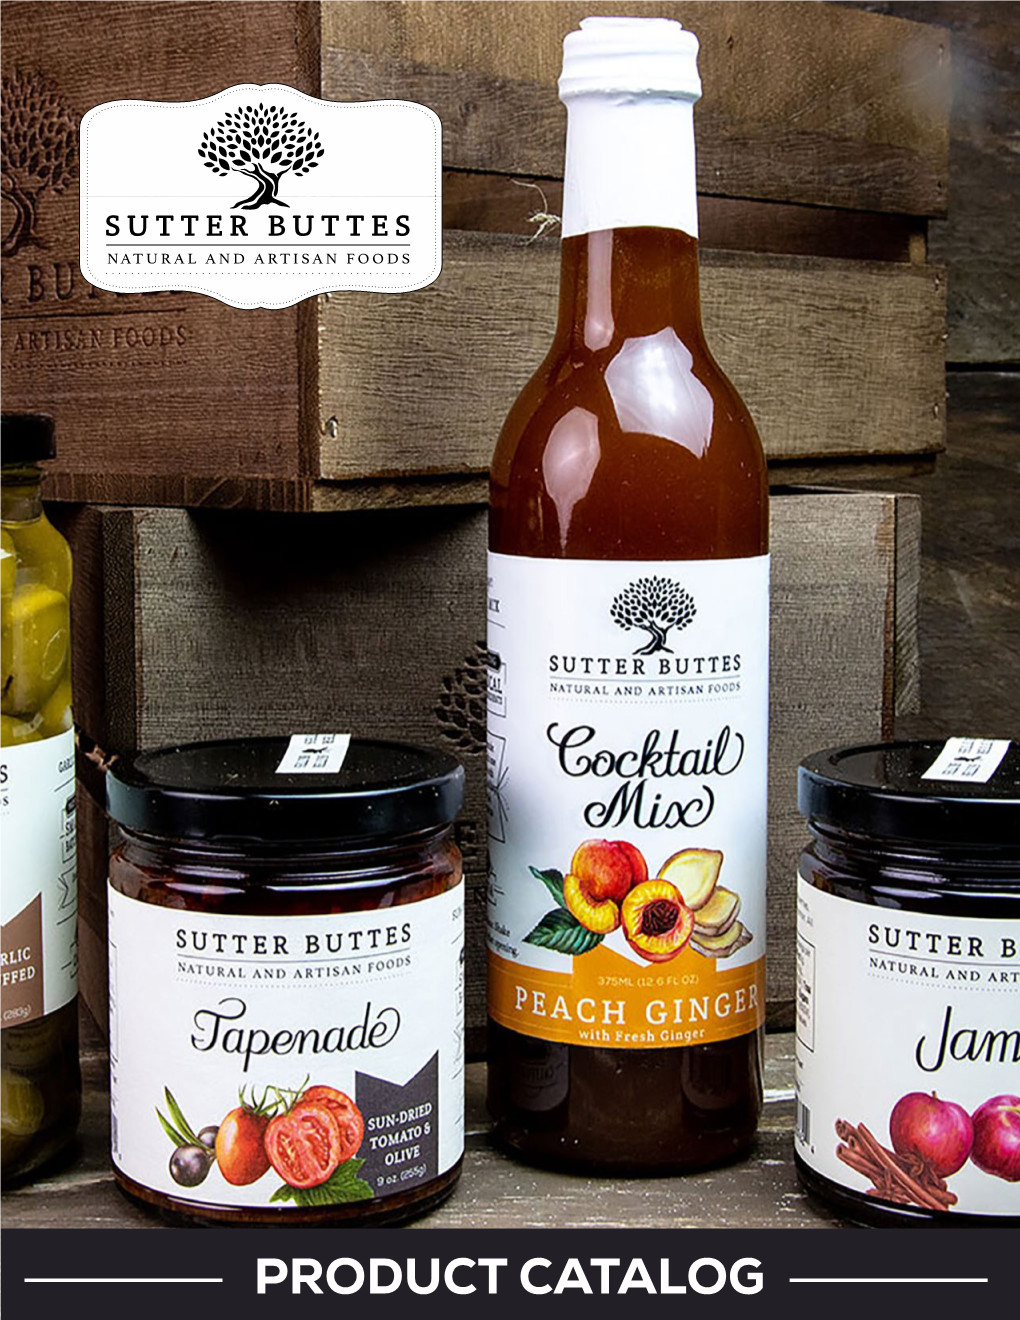 Product Catalog Sutter Buttes Natural and Artisan Food Company